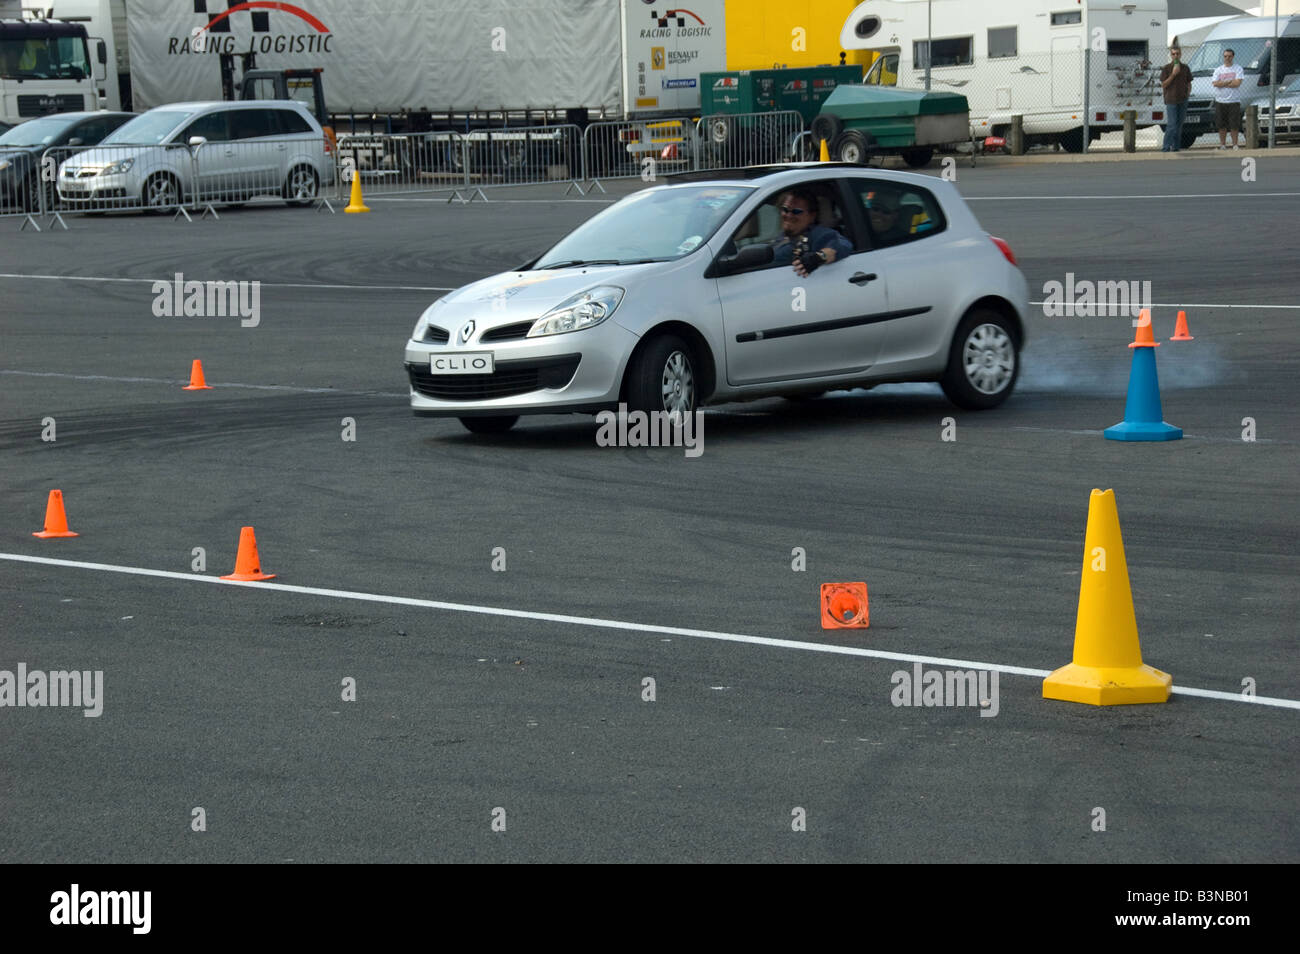 Renault clio stunt driving experience Stock Photo